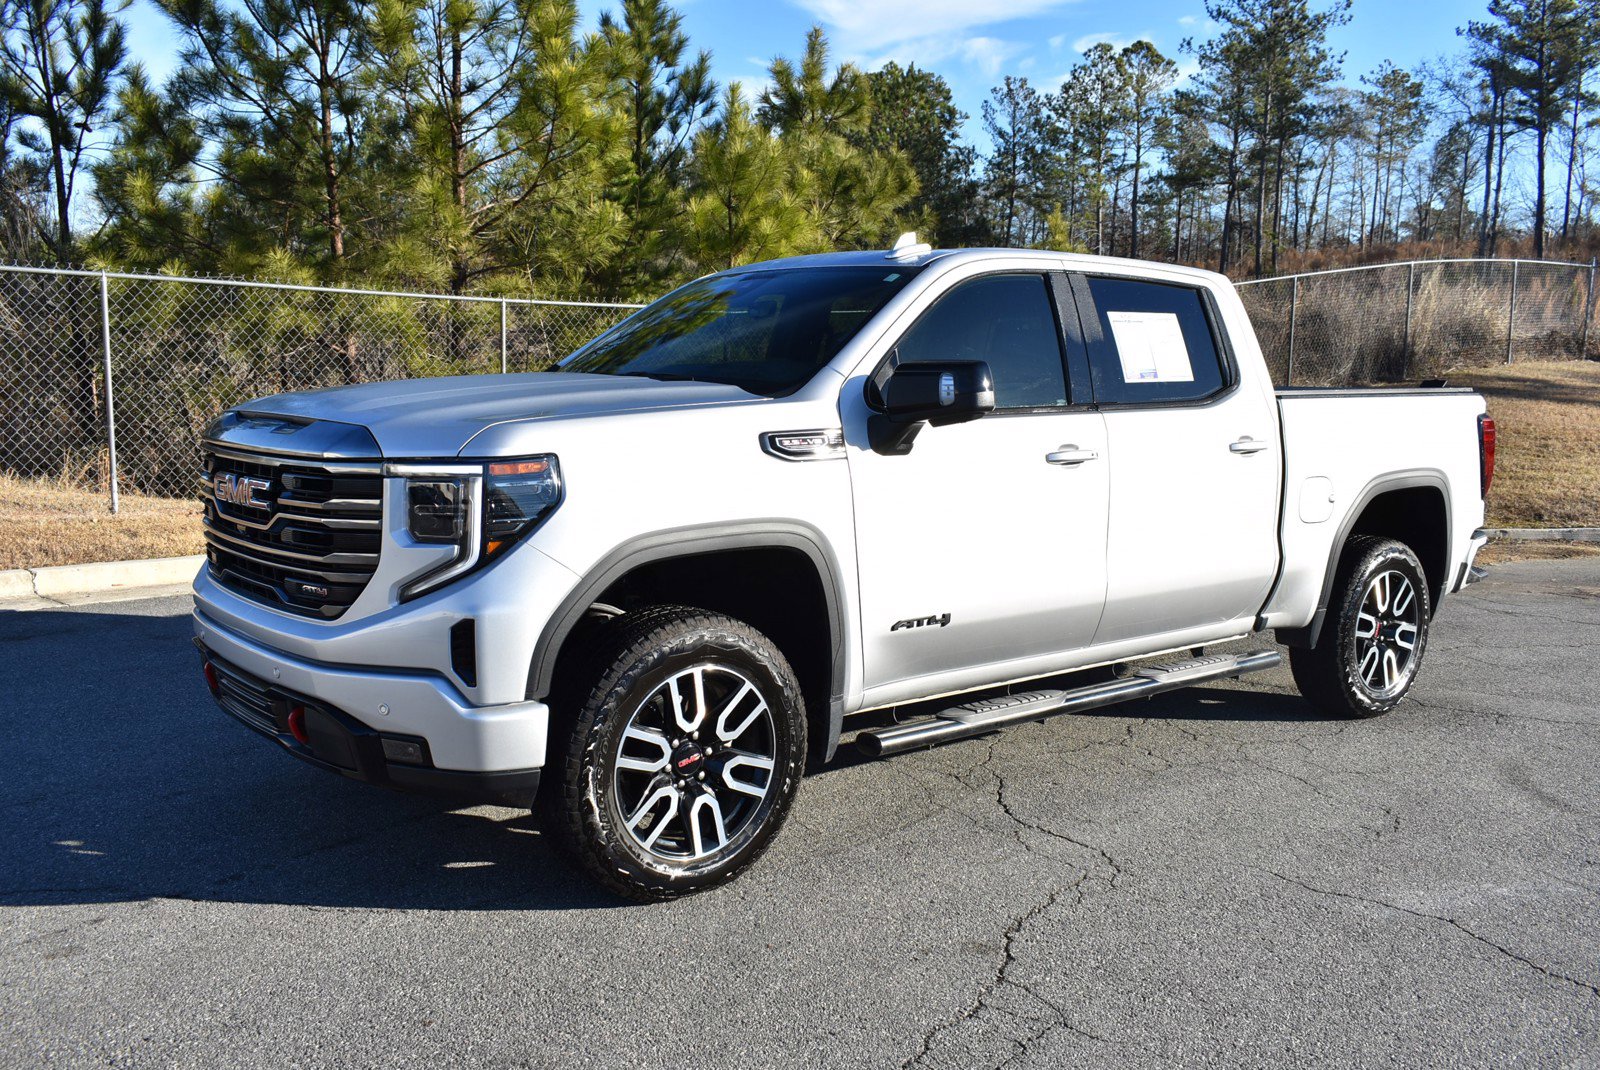 Pre-Owned 2022 GMC Sierra 1500 AT4 Crew Cab Pickup For Sale #300973P |  Valdosta Toyota